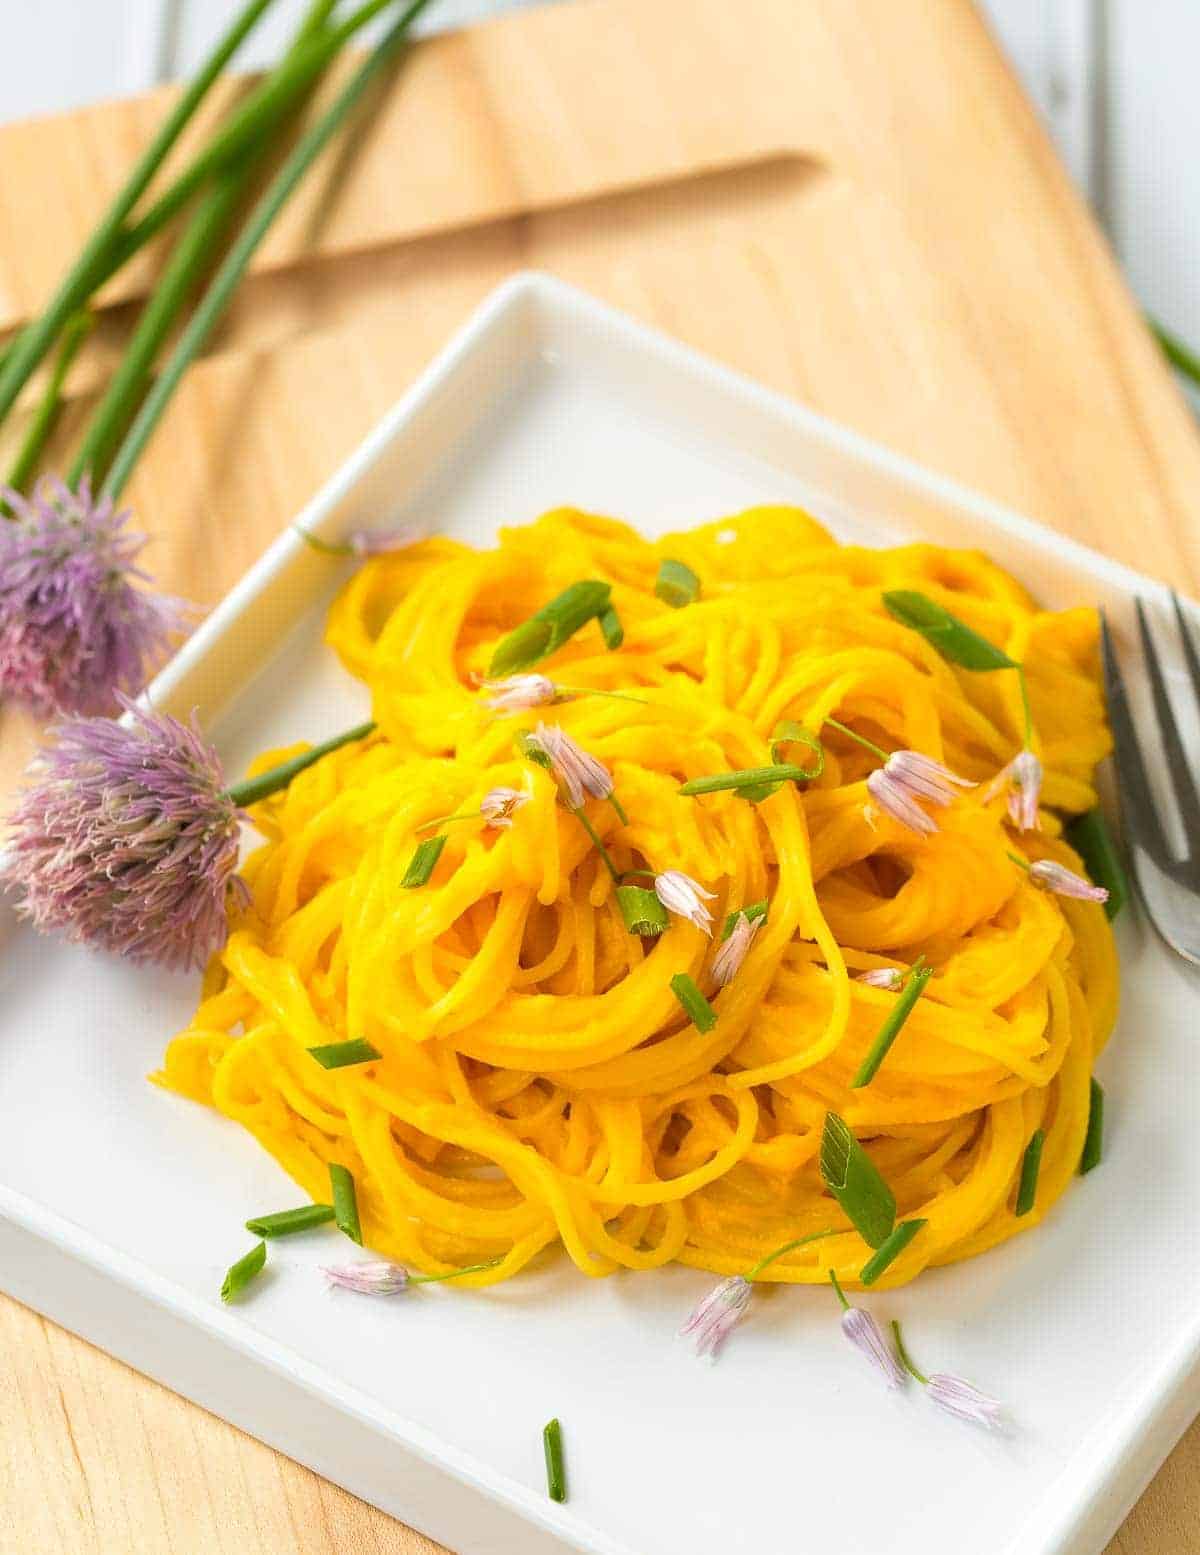 A serving of pasta mixed with carrot pesto, garnished with chives, in shallow square white dish.